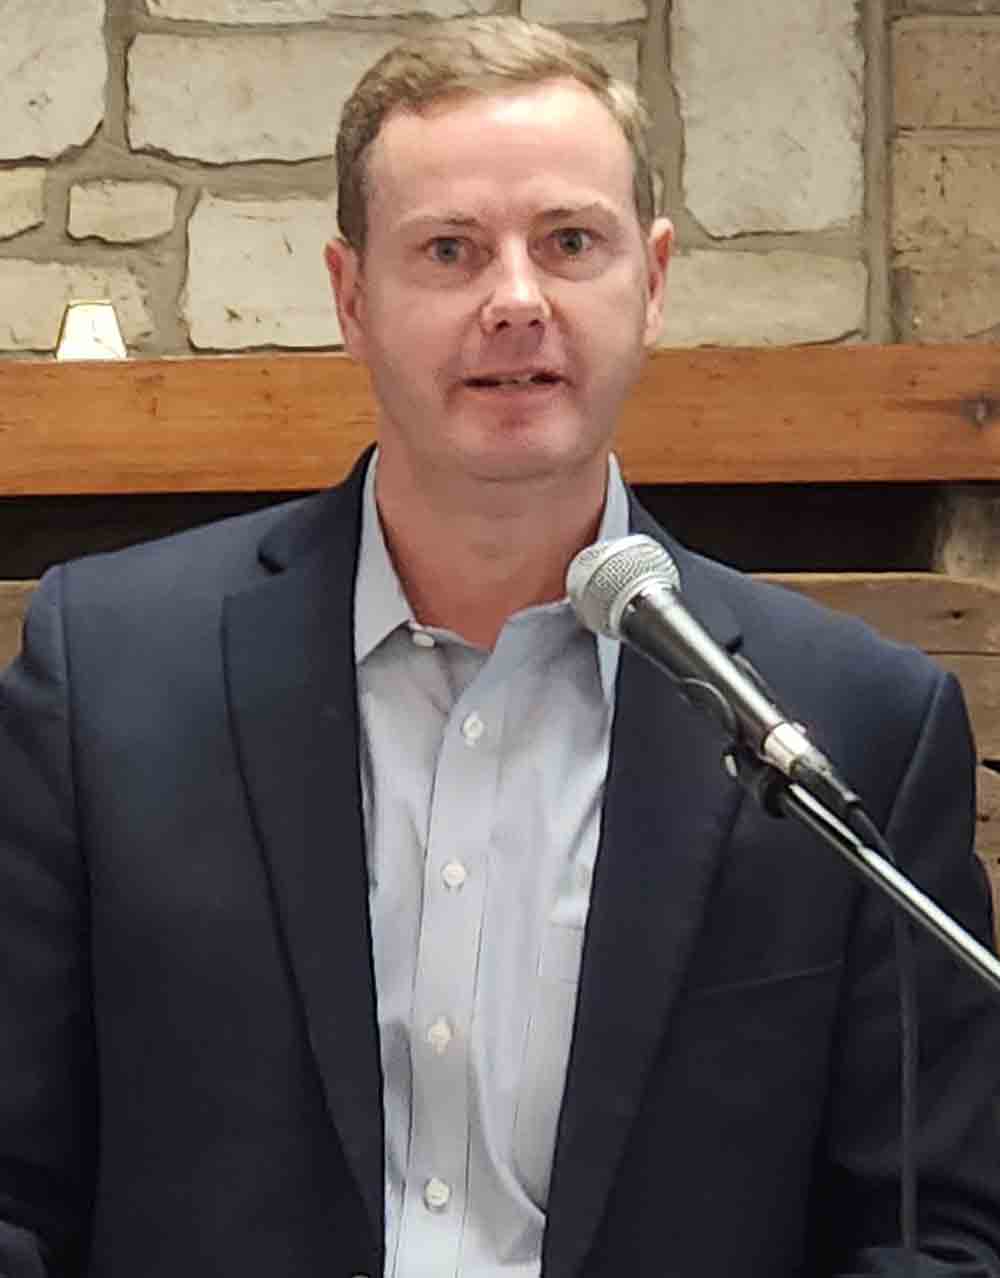 State Rep. Trent Ashby